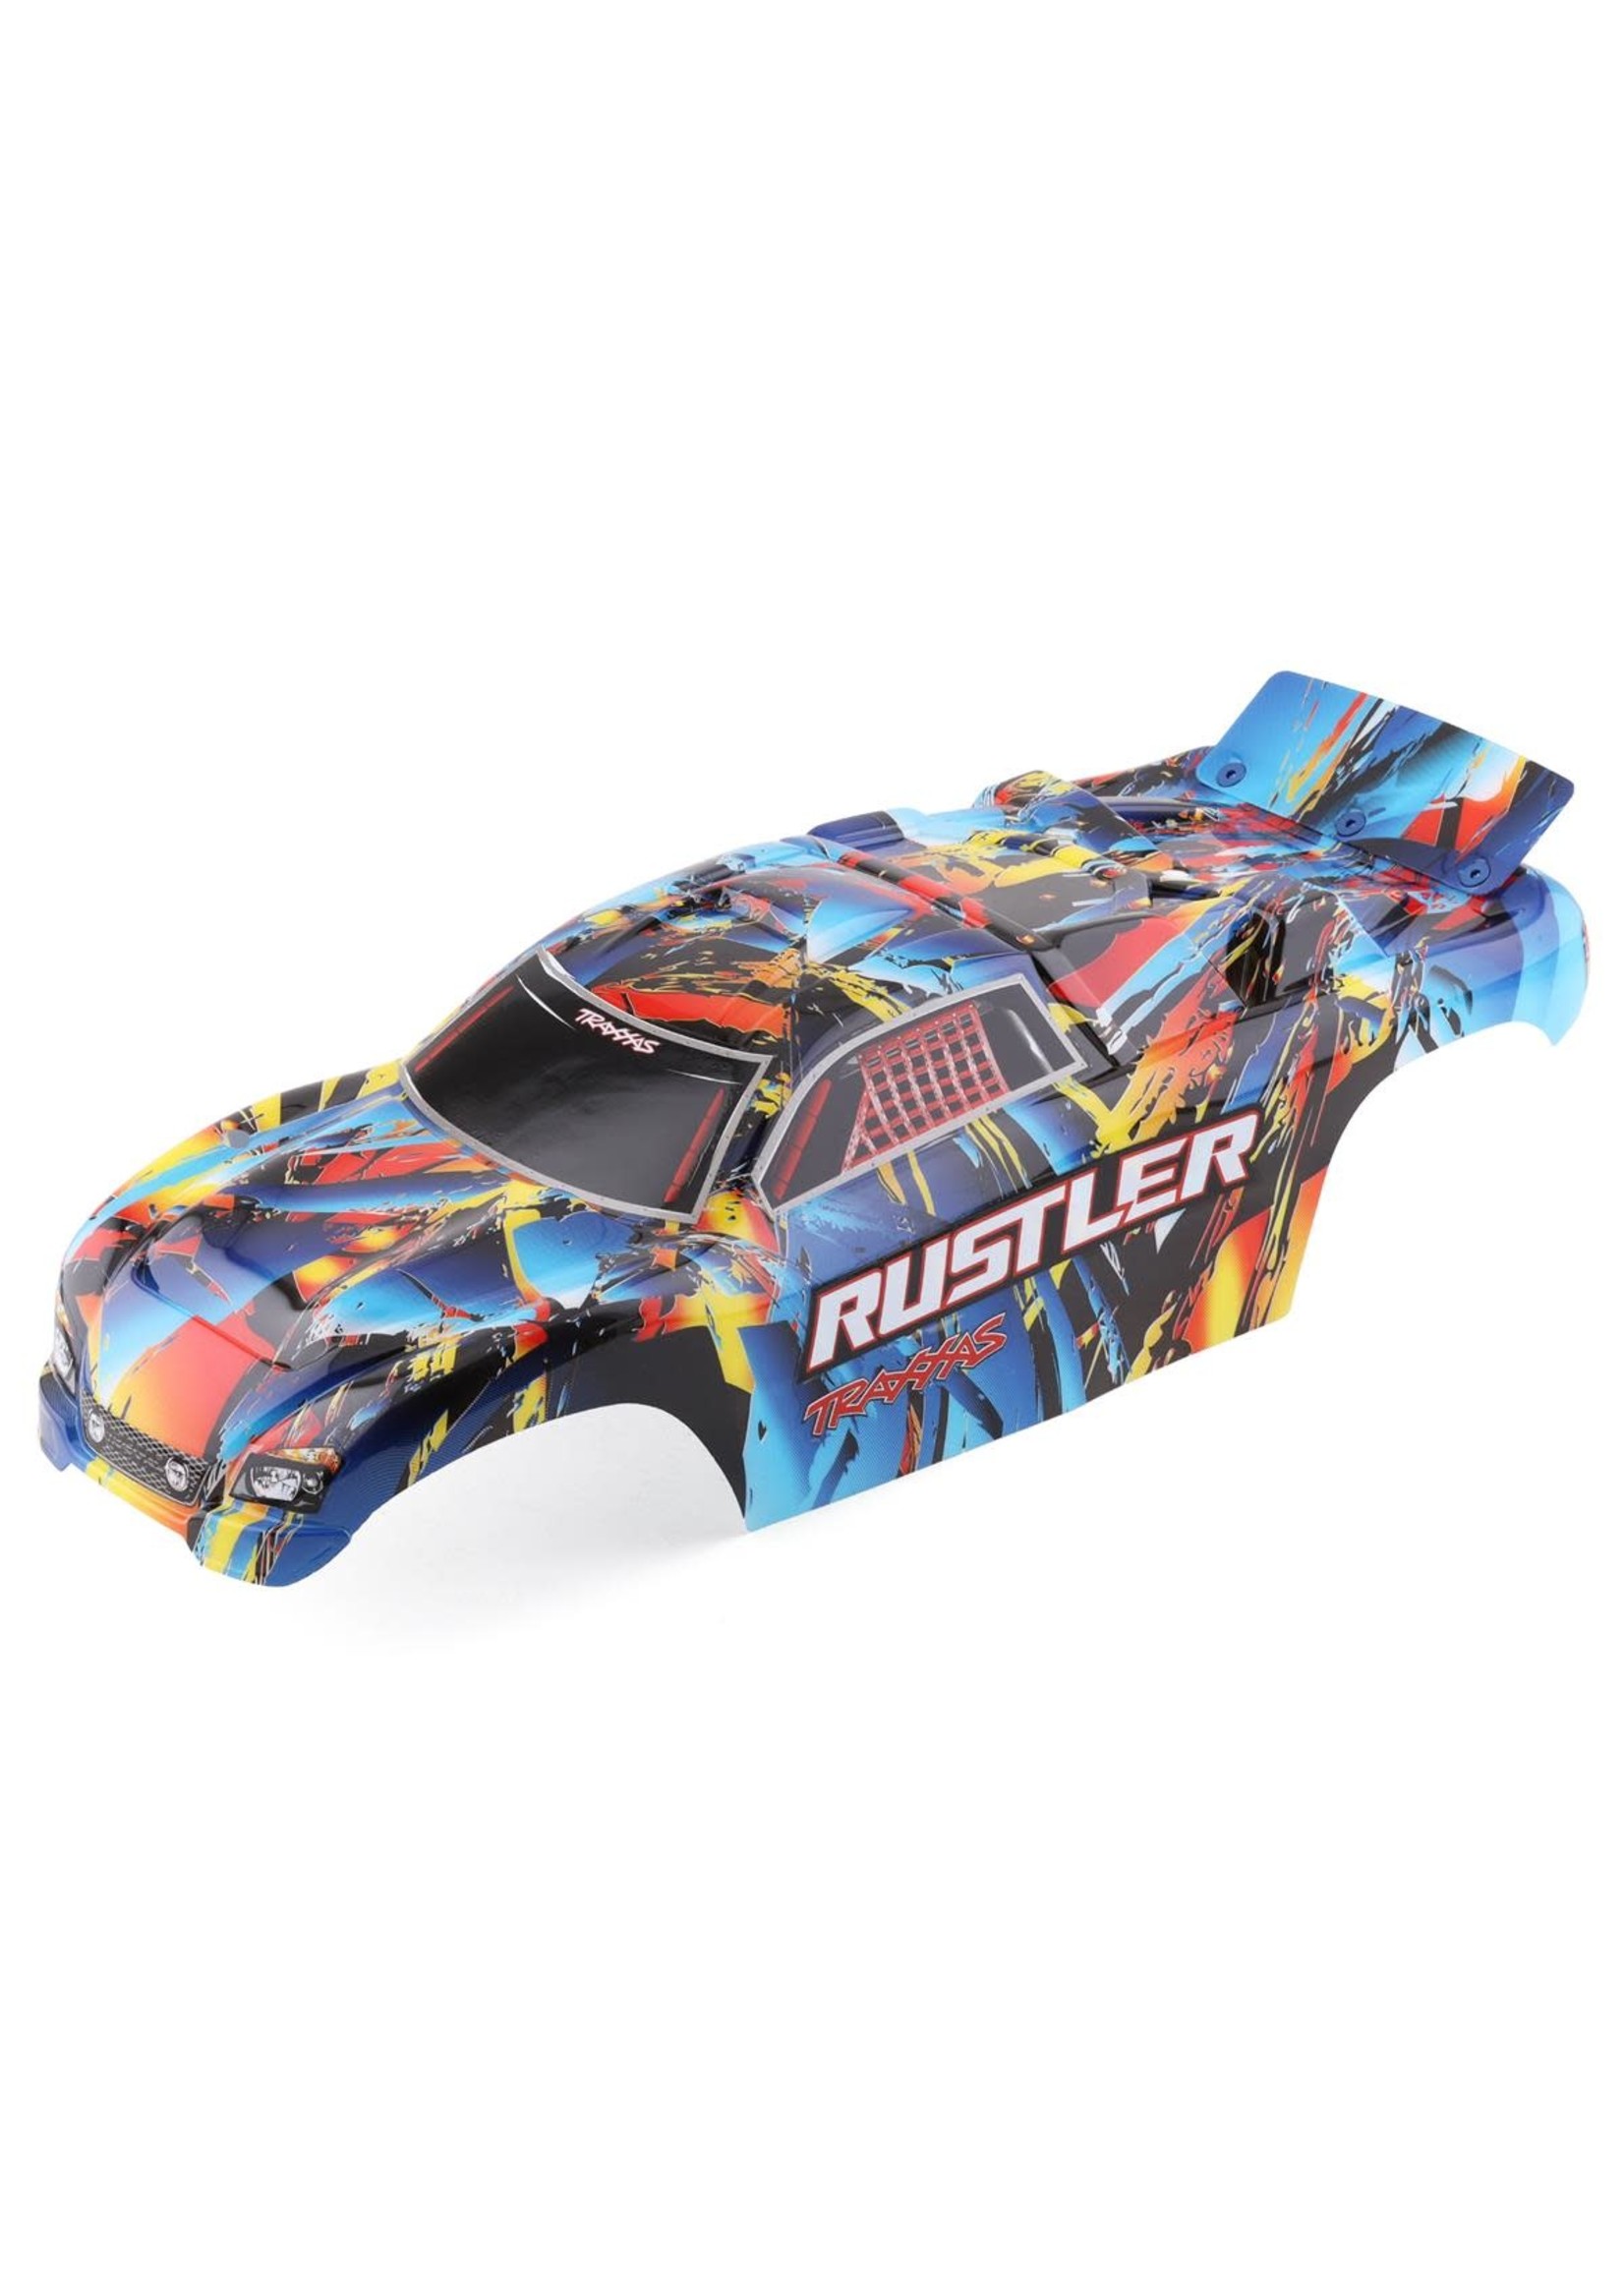 Traxxas 3748 Traxxas Rustler Rock n' Roll Painted/Decaled Body